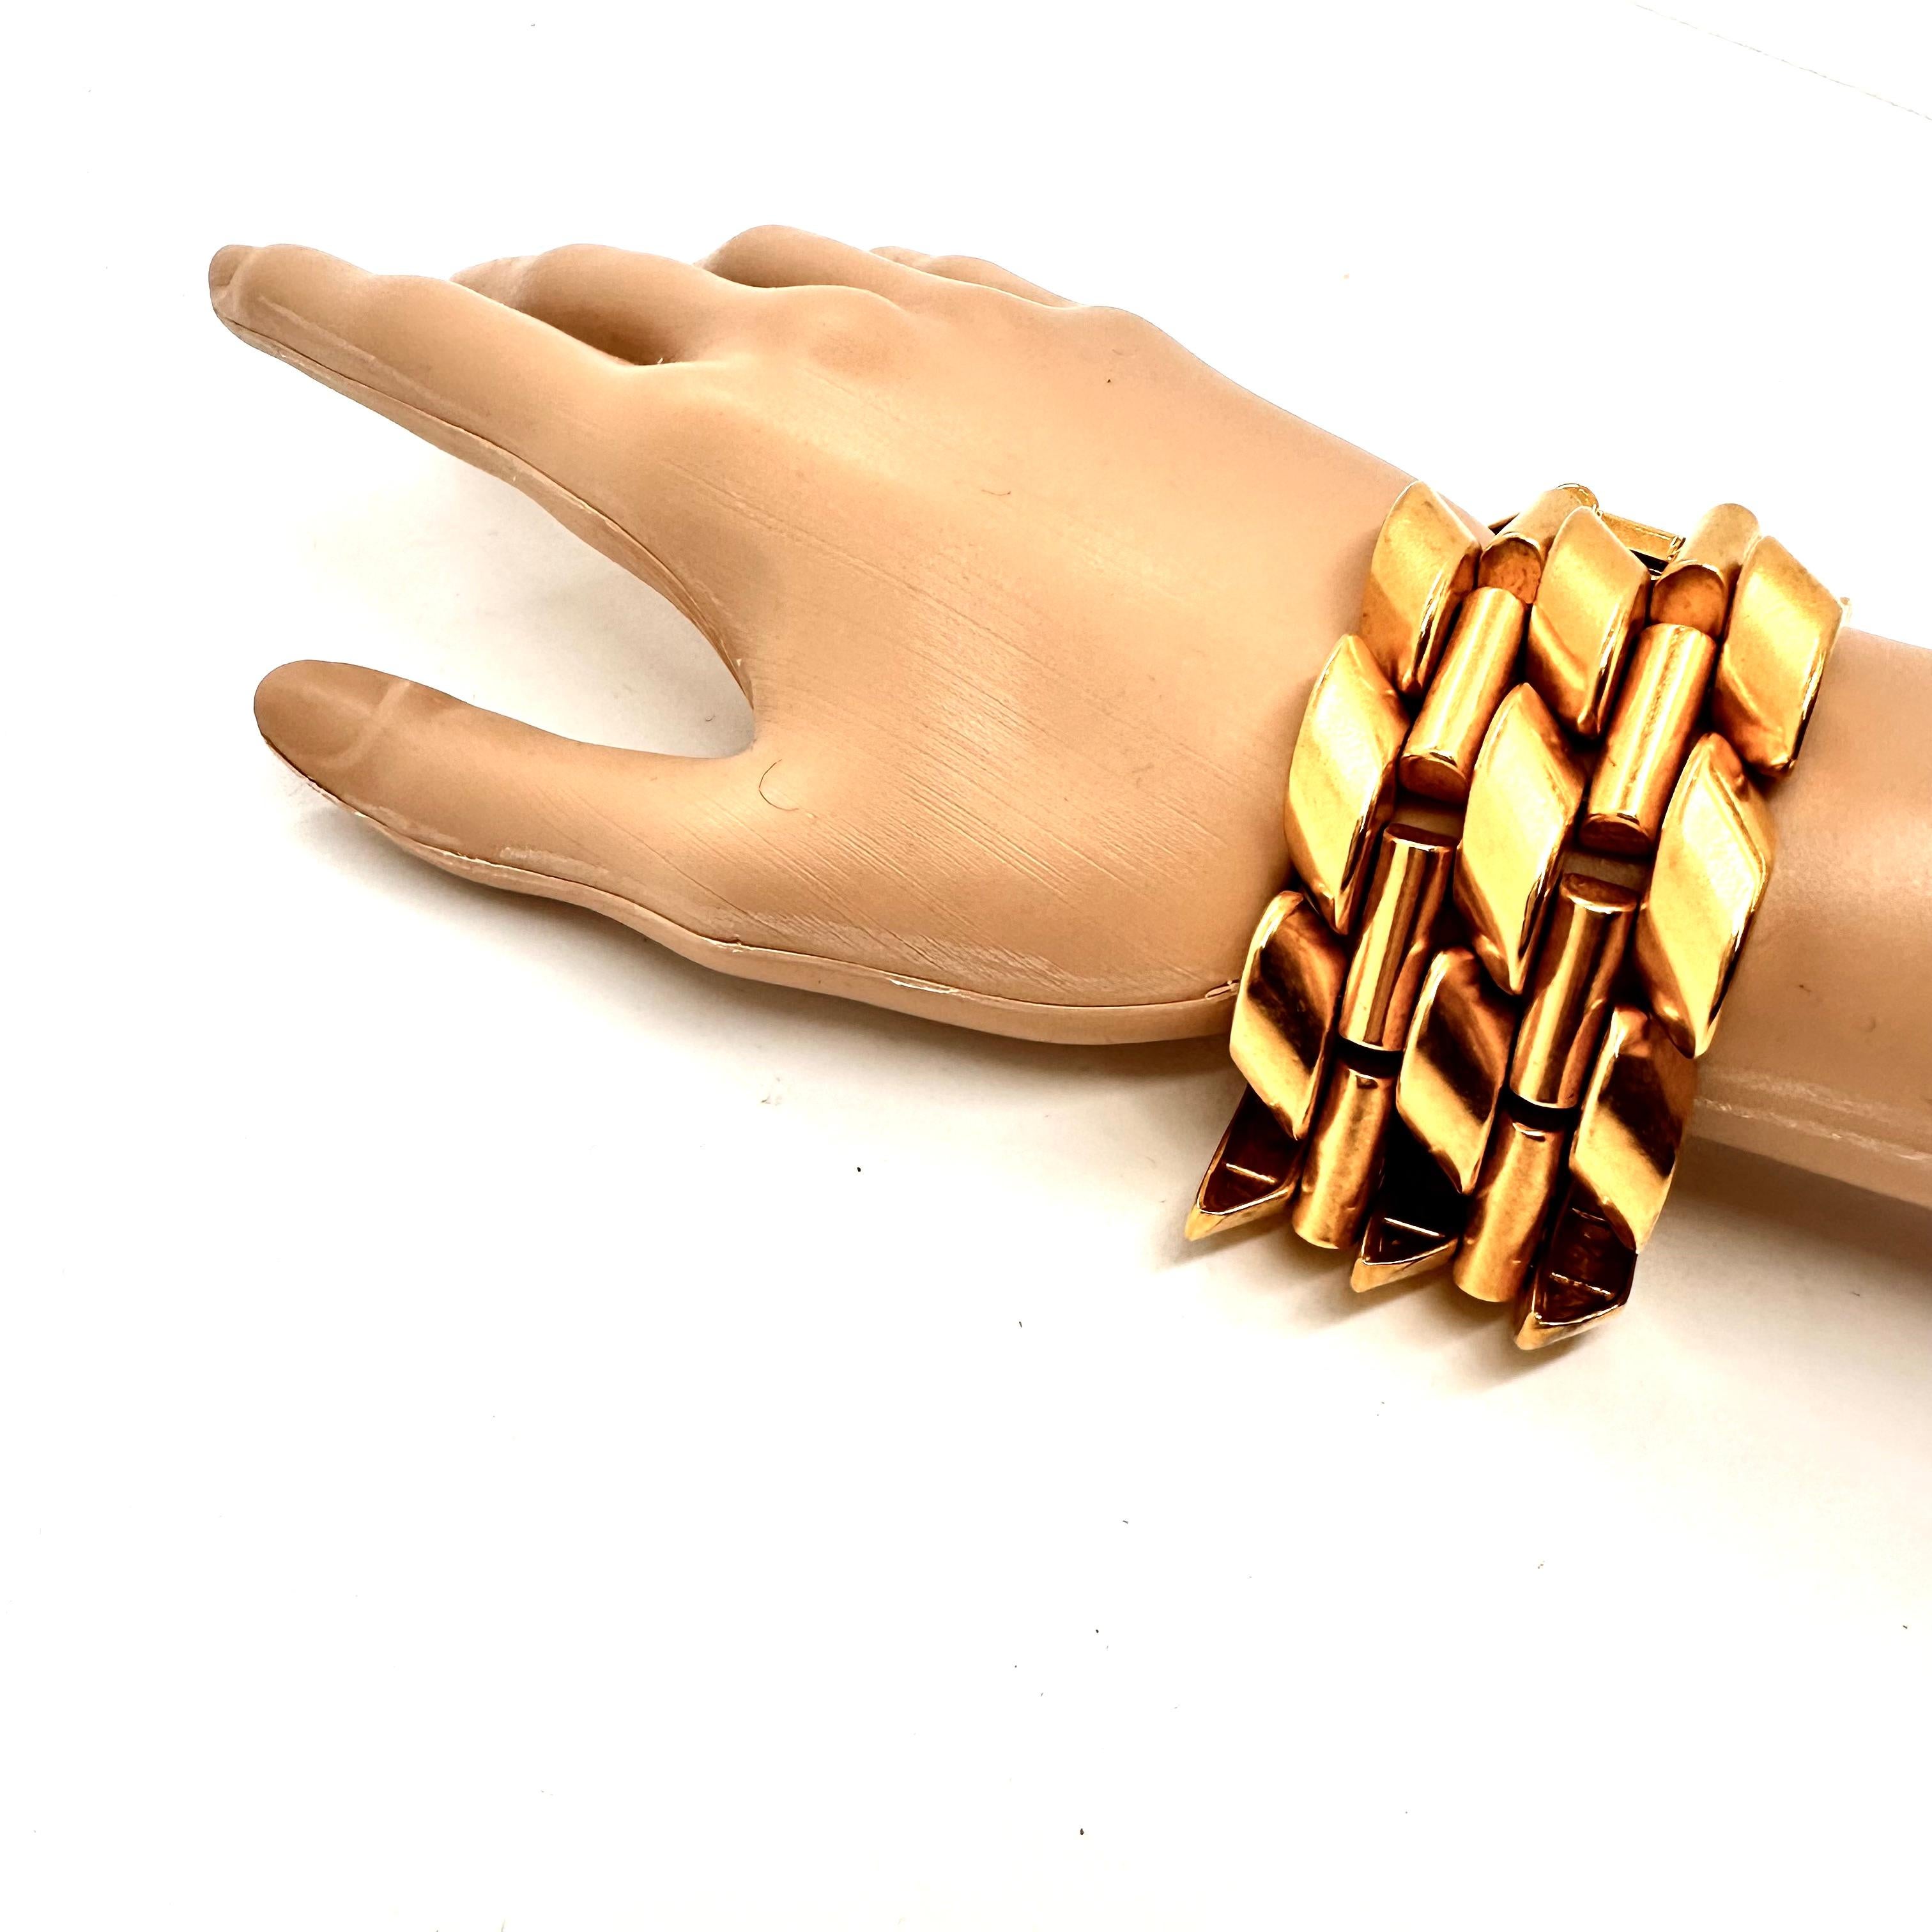 Robert Lee Morris loved to mix architectural and organic elements, and this wide luxurious GOLD plated brass link is rich with mechanical shapes,  herringbone woven with rounded bars. He makes sculptural art/fashion jewelry that is both sensually